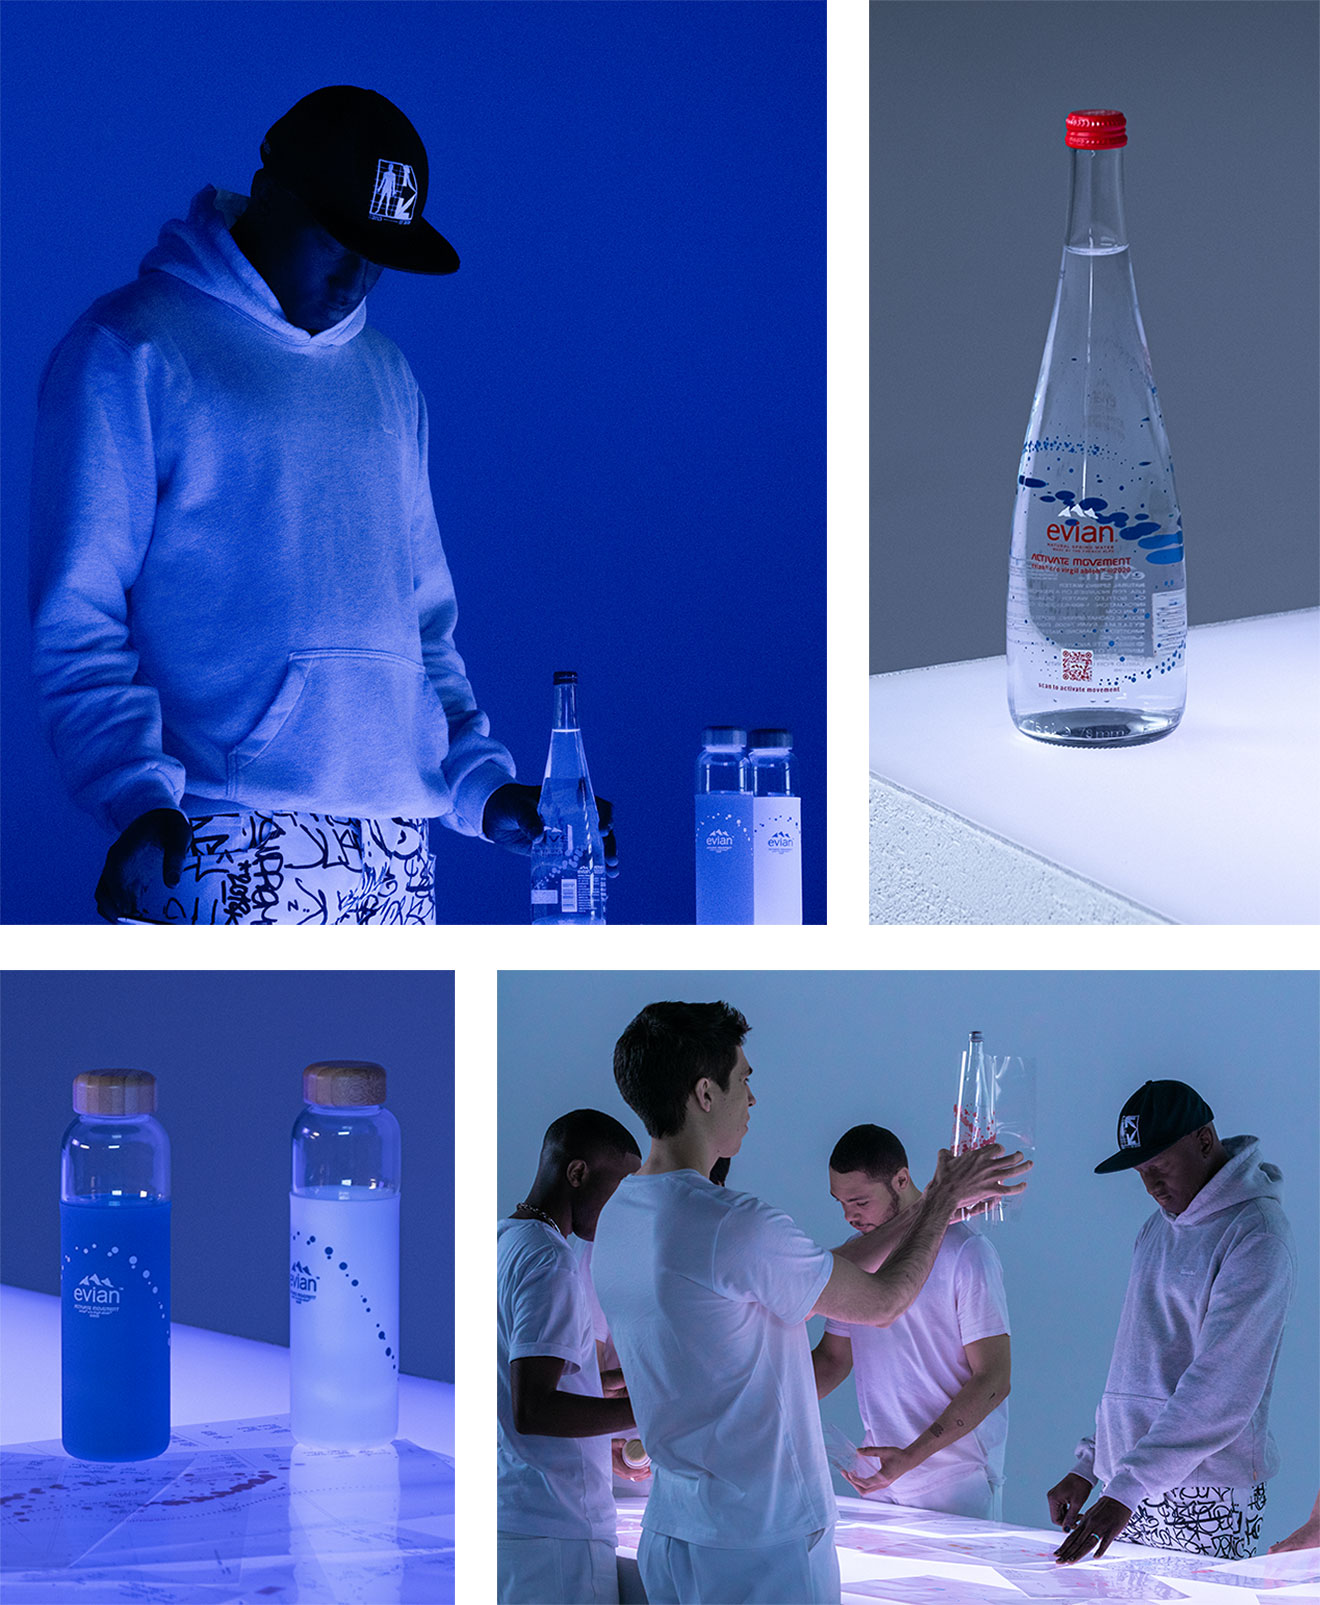 Virgil Abloh and Evian Are Here to Make Hydration Cool